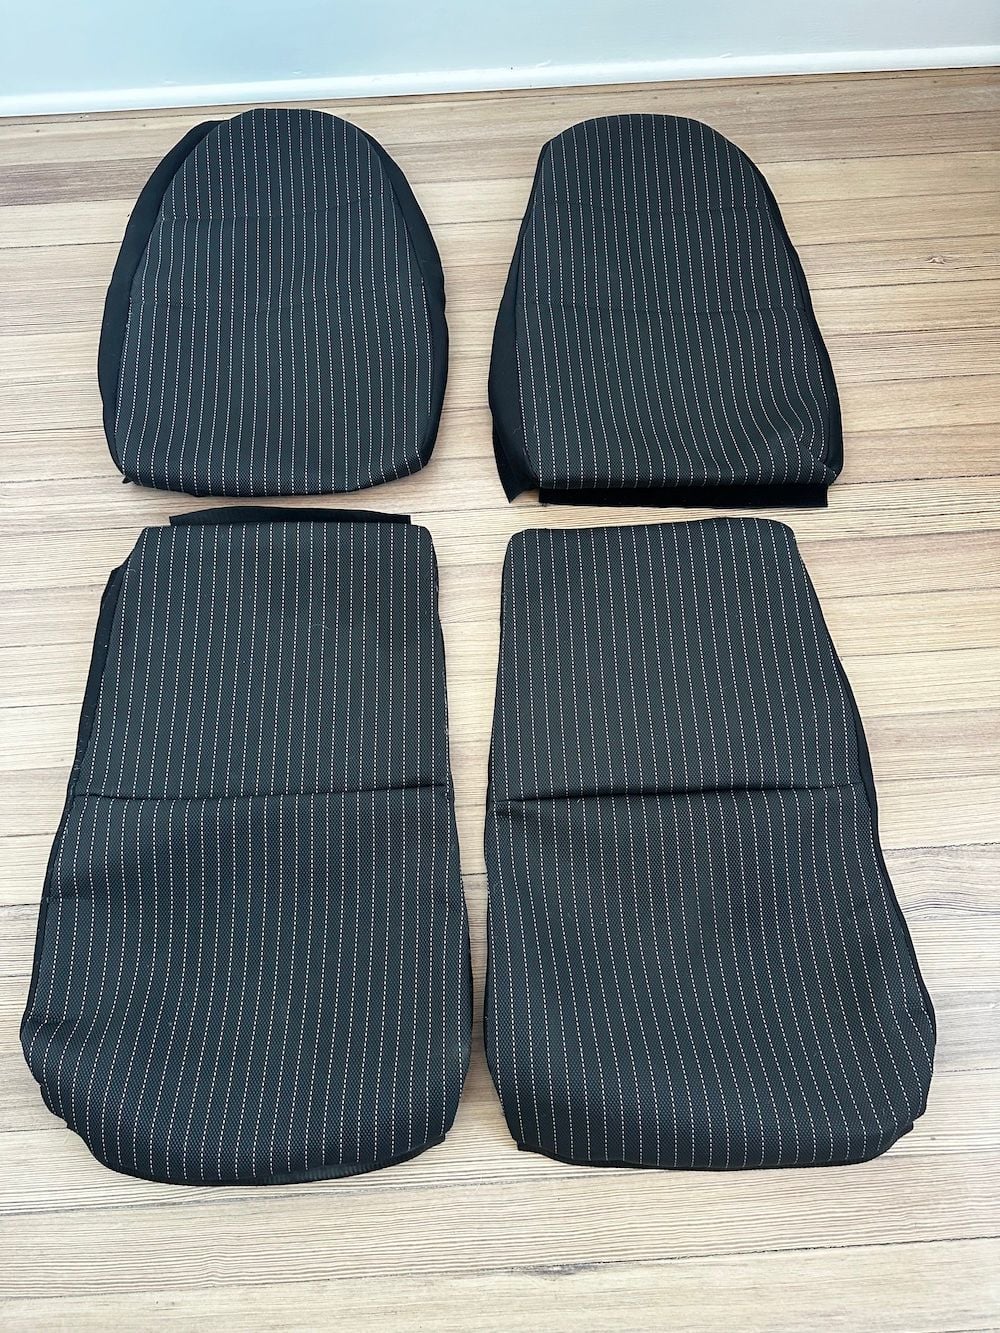 Interior/Upholstery - 991 ClassicFX LWBS inserts Pinstripe / Carrera T style - Used - All Years  All Models - Bayport, NY 11705, United States